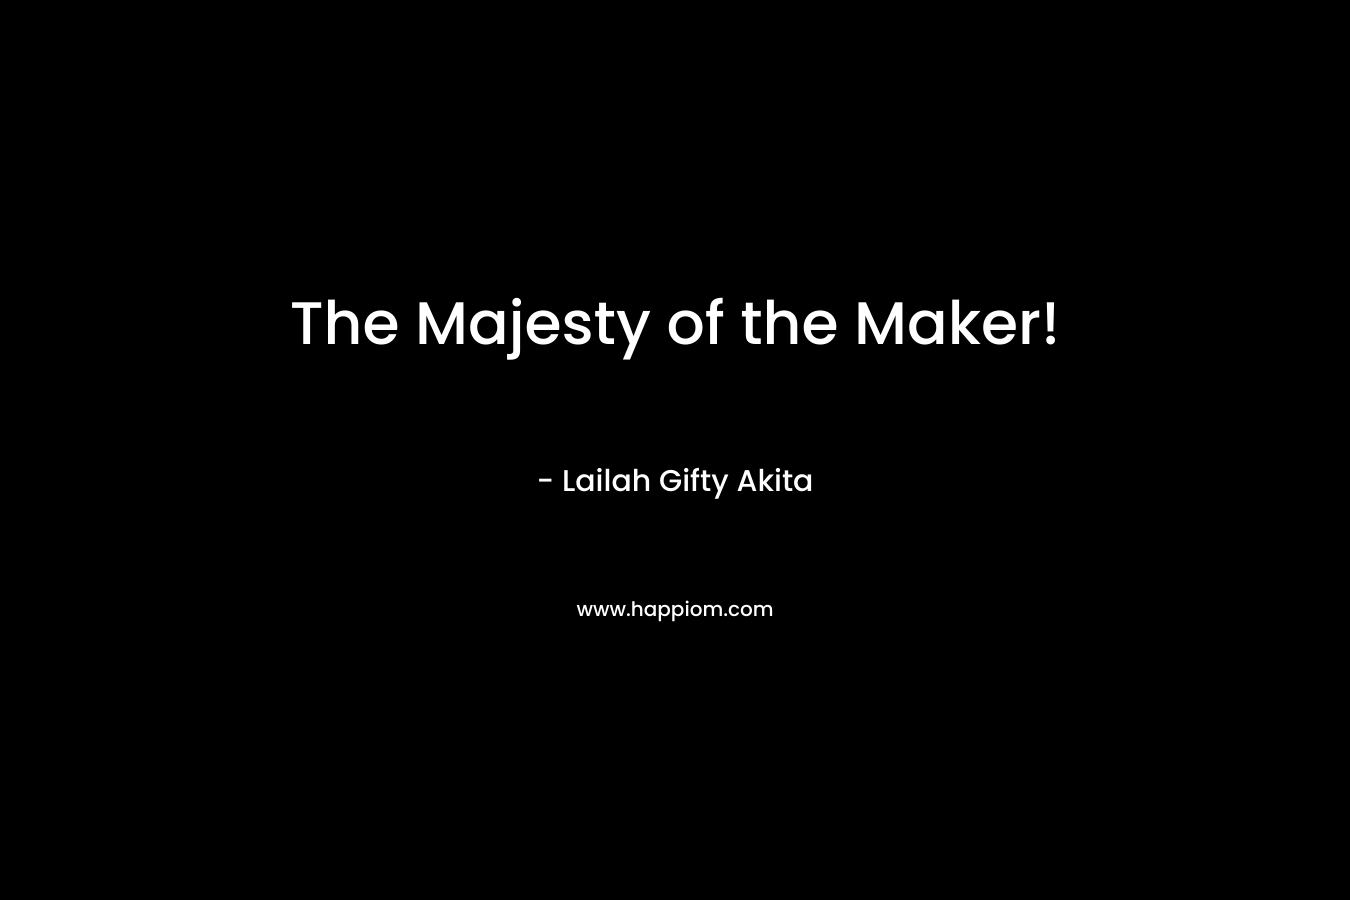 The Majesty of the Maker!